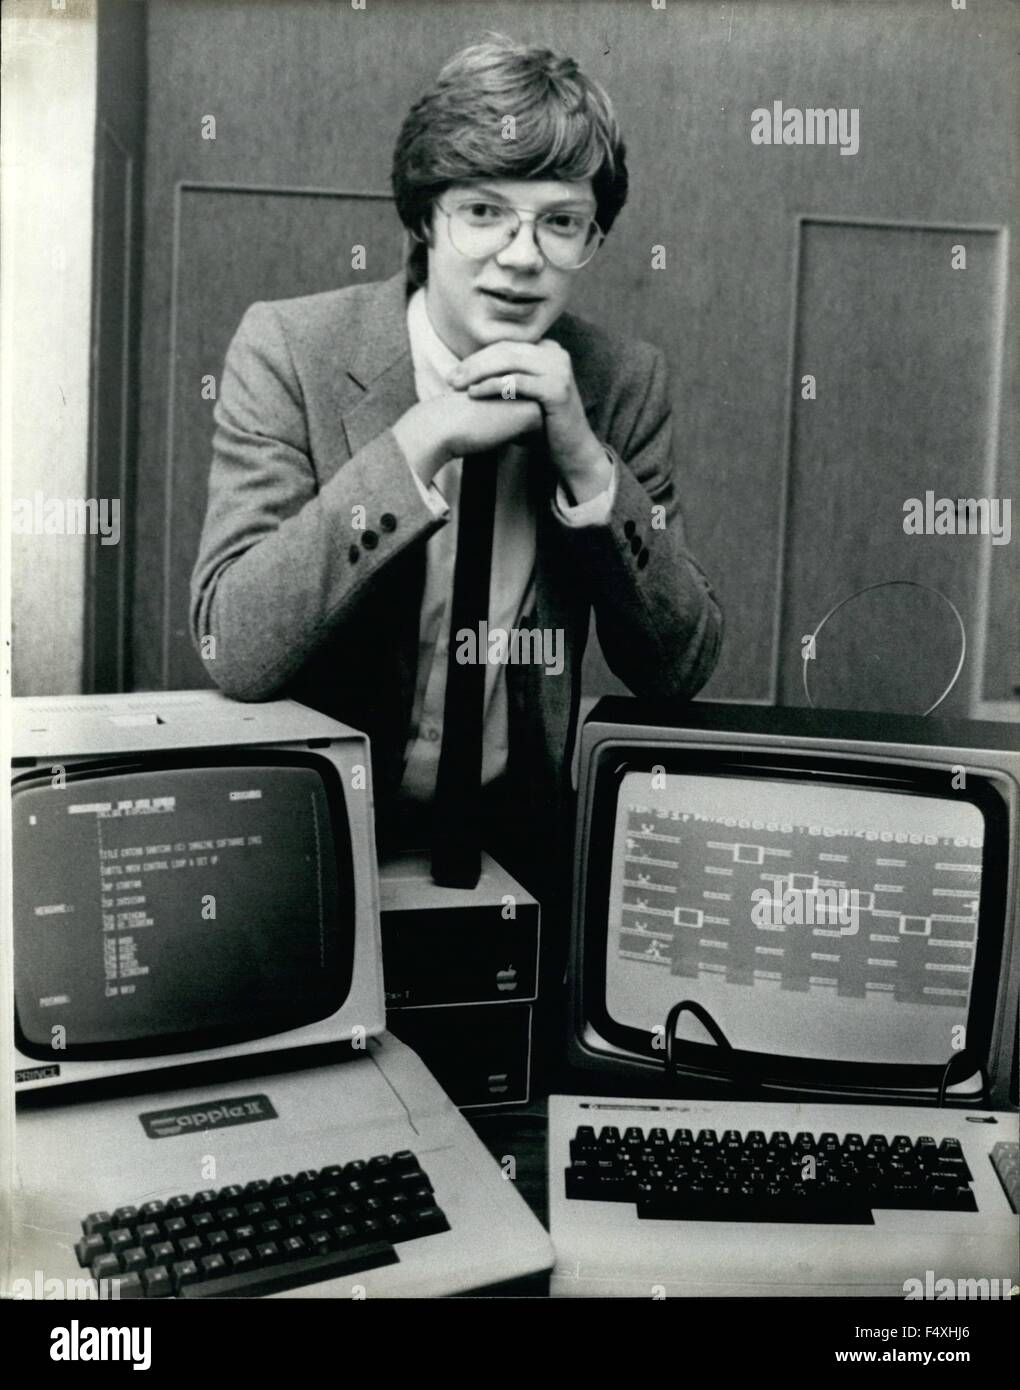 1981 - The Computer Kid: A young computer genius is being payed a fortune - for designing games. Eugene Evans is only 16 yet he has landed a job as a software designer with a Liverpool based company and earns more than 75,000 U.S. Dollars a year. The son of a bus driver, Eugene earns more than seven times as much as his father. Despite the fact that he is well on his way to becoming a millionaire Eugene is modest about his success. © Keystone Pictures USA/ZUMAPRESS.com/Alamy Live News Stock Photo